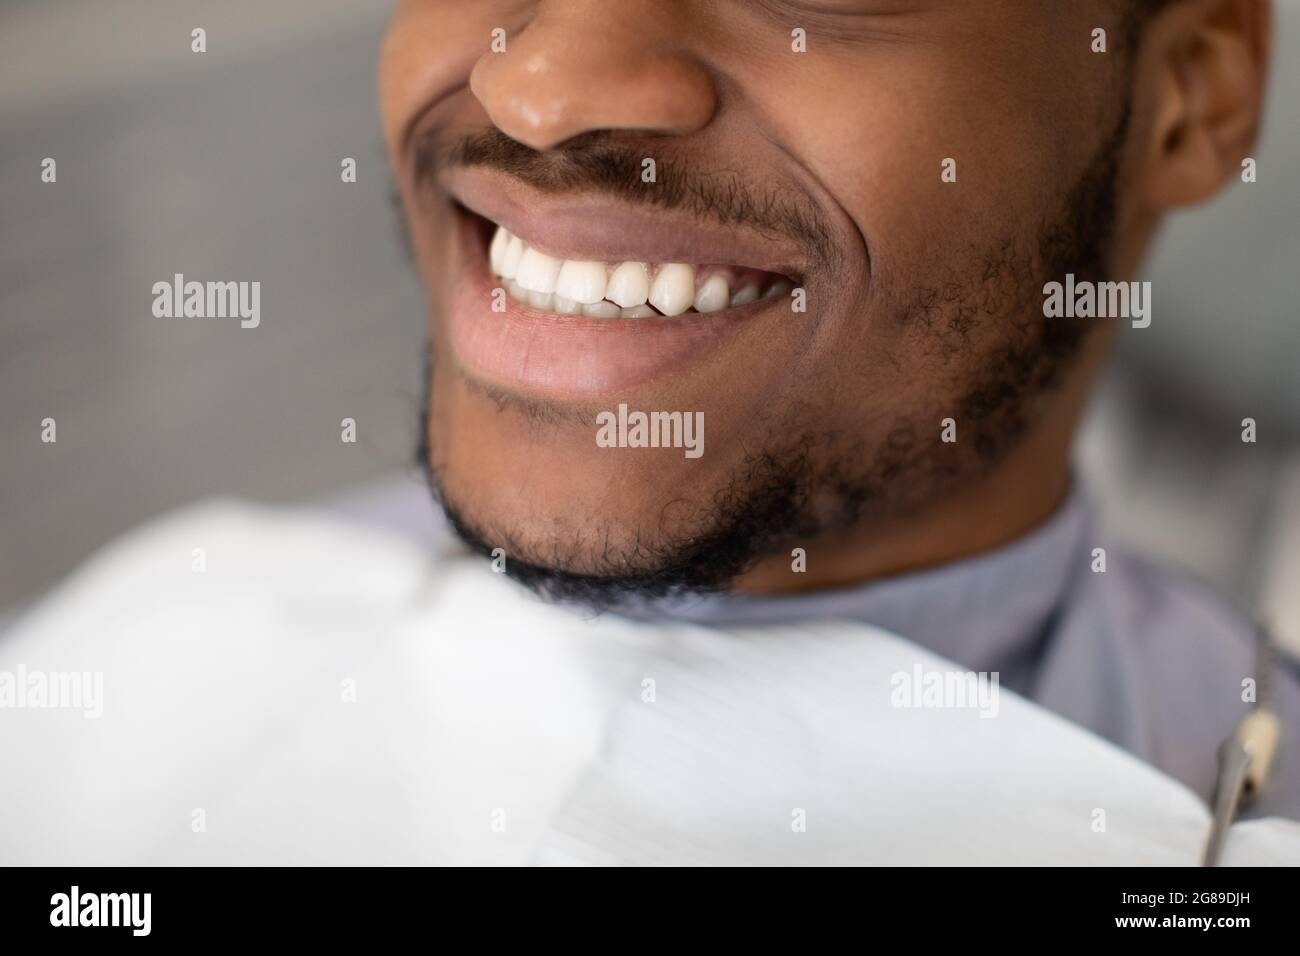 Dental Treatment. Happy Young African American Man Widely Smiling With Perfect Teeth Stock Photo